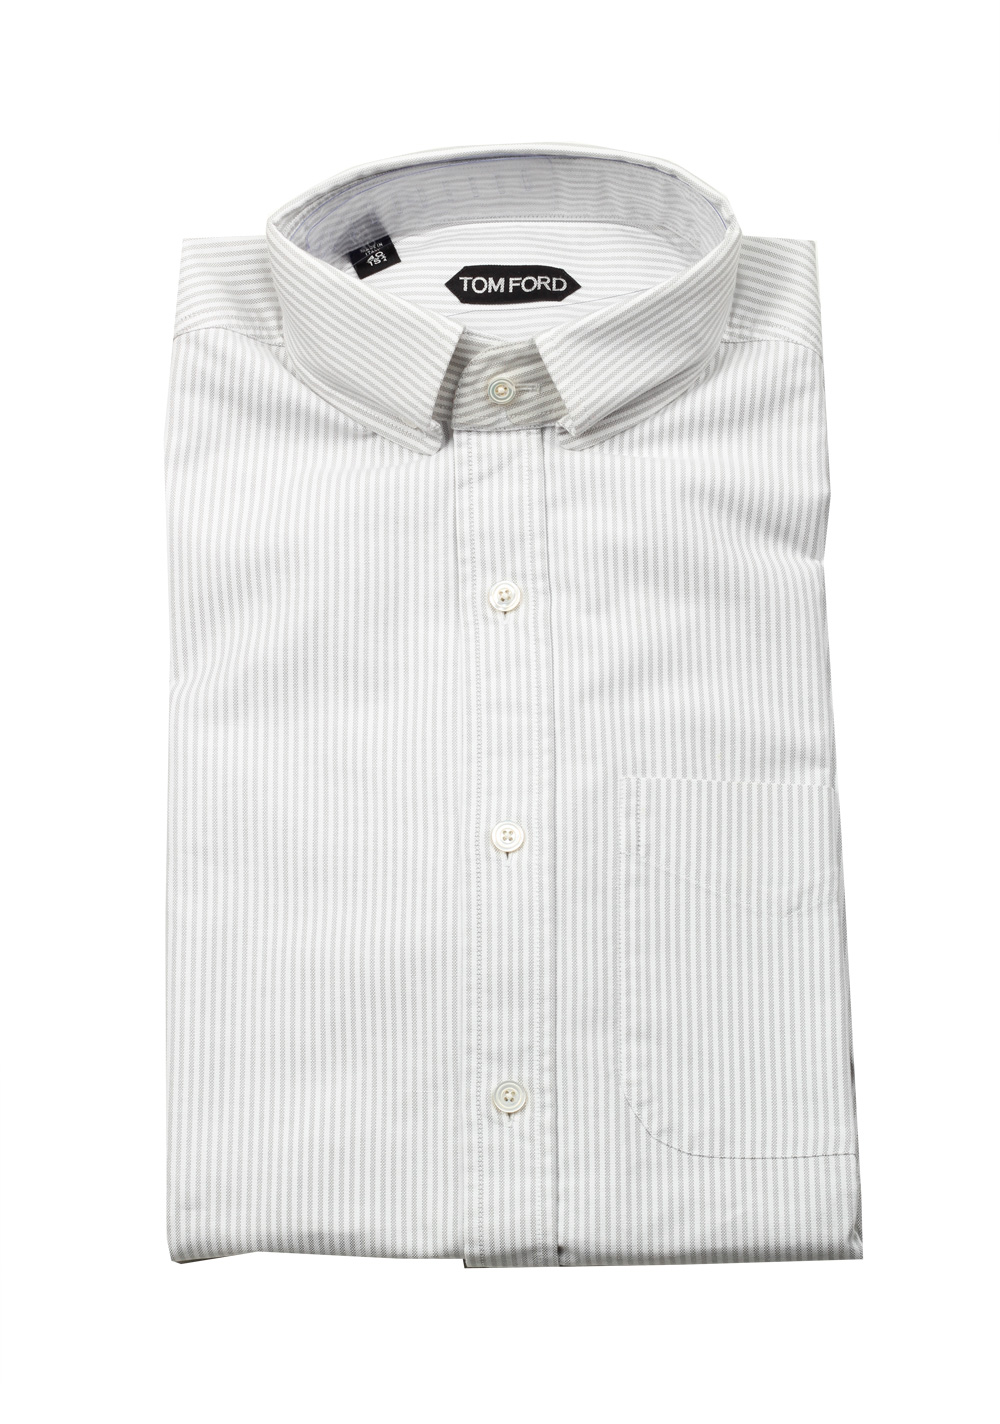 TOM FORD Striped White Gray Button Down Casual Shirt Size 40 / 15,75 U.S. | Costume Limité